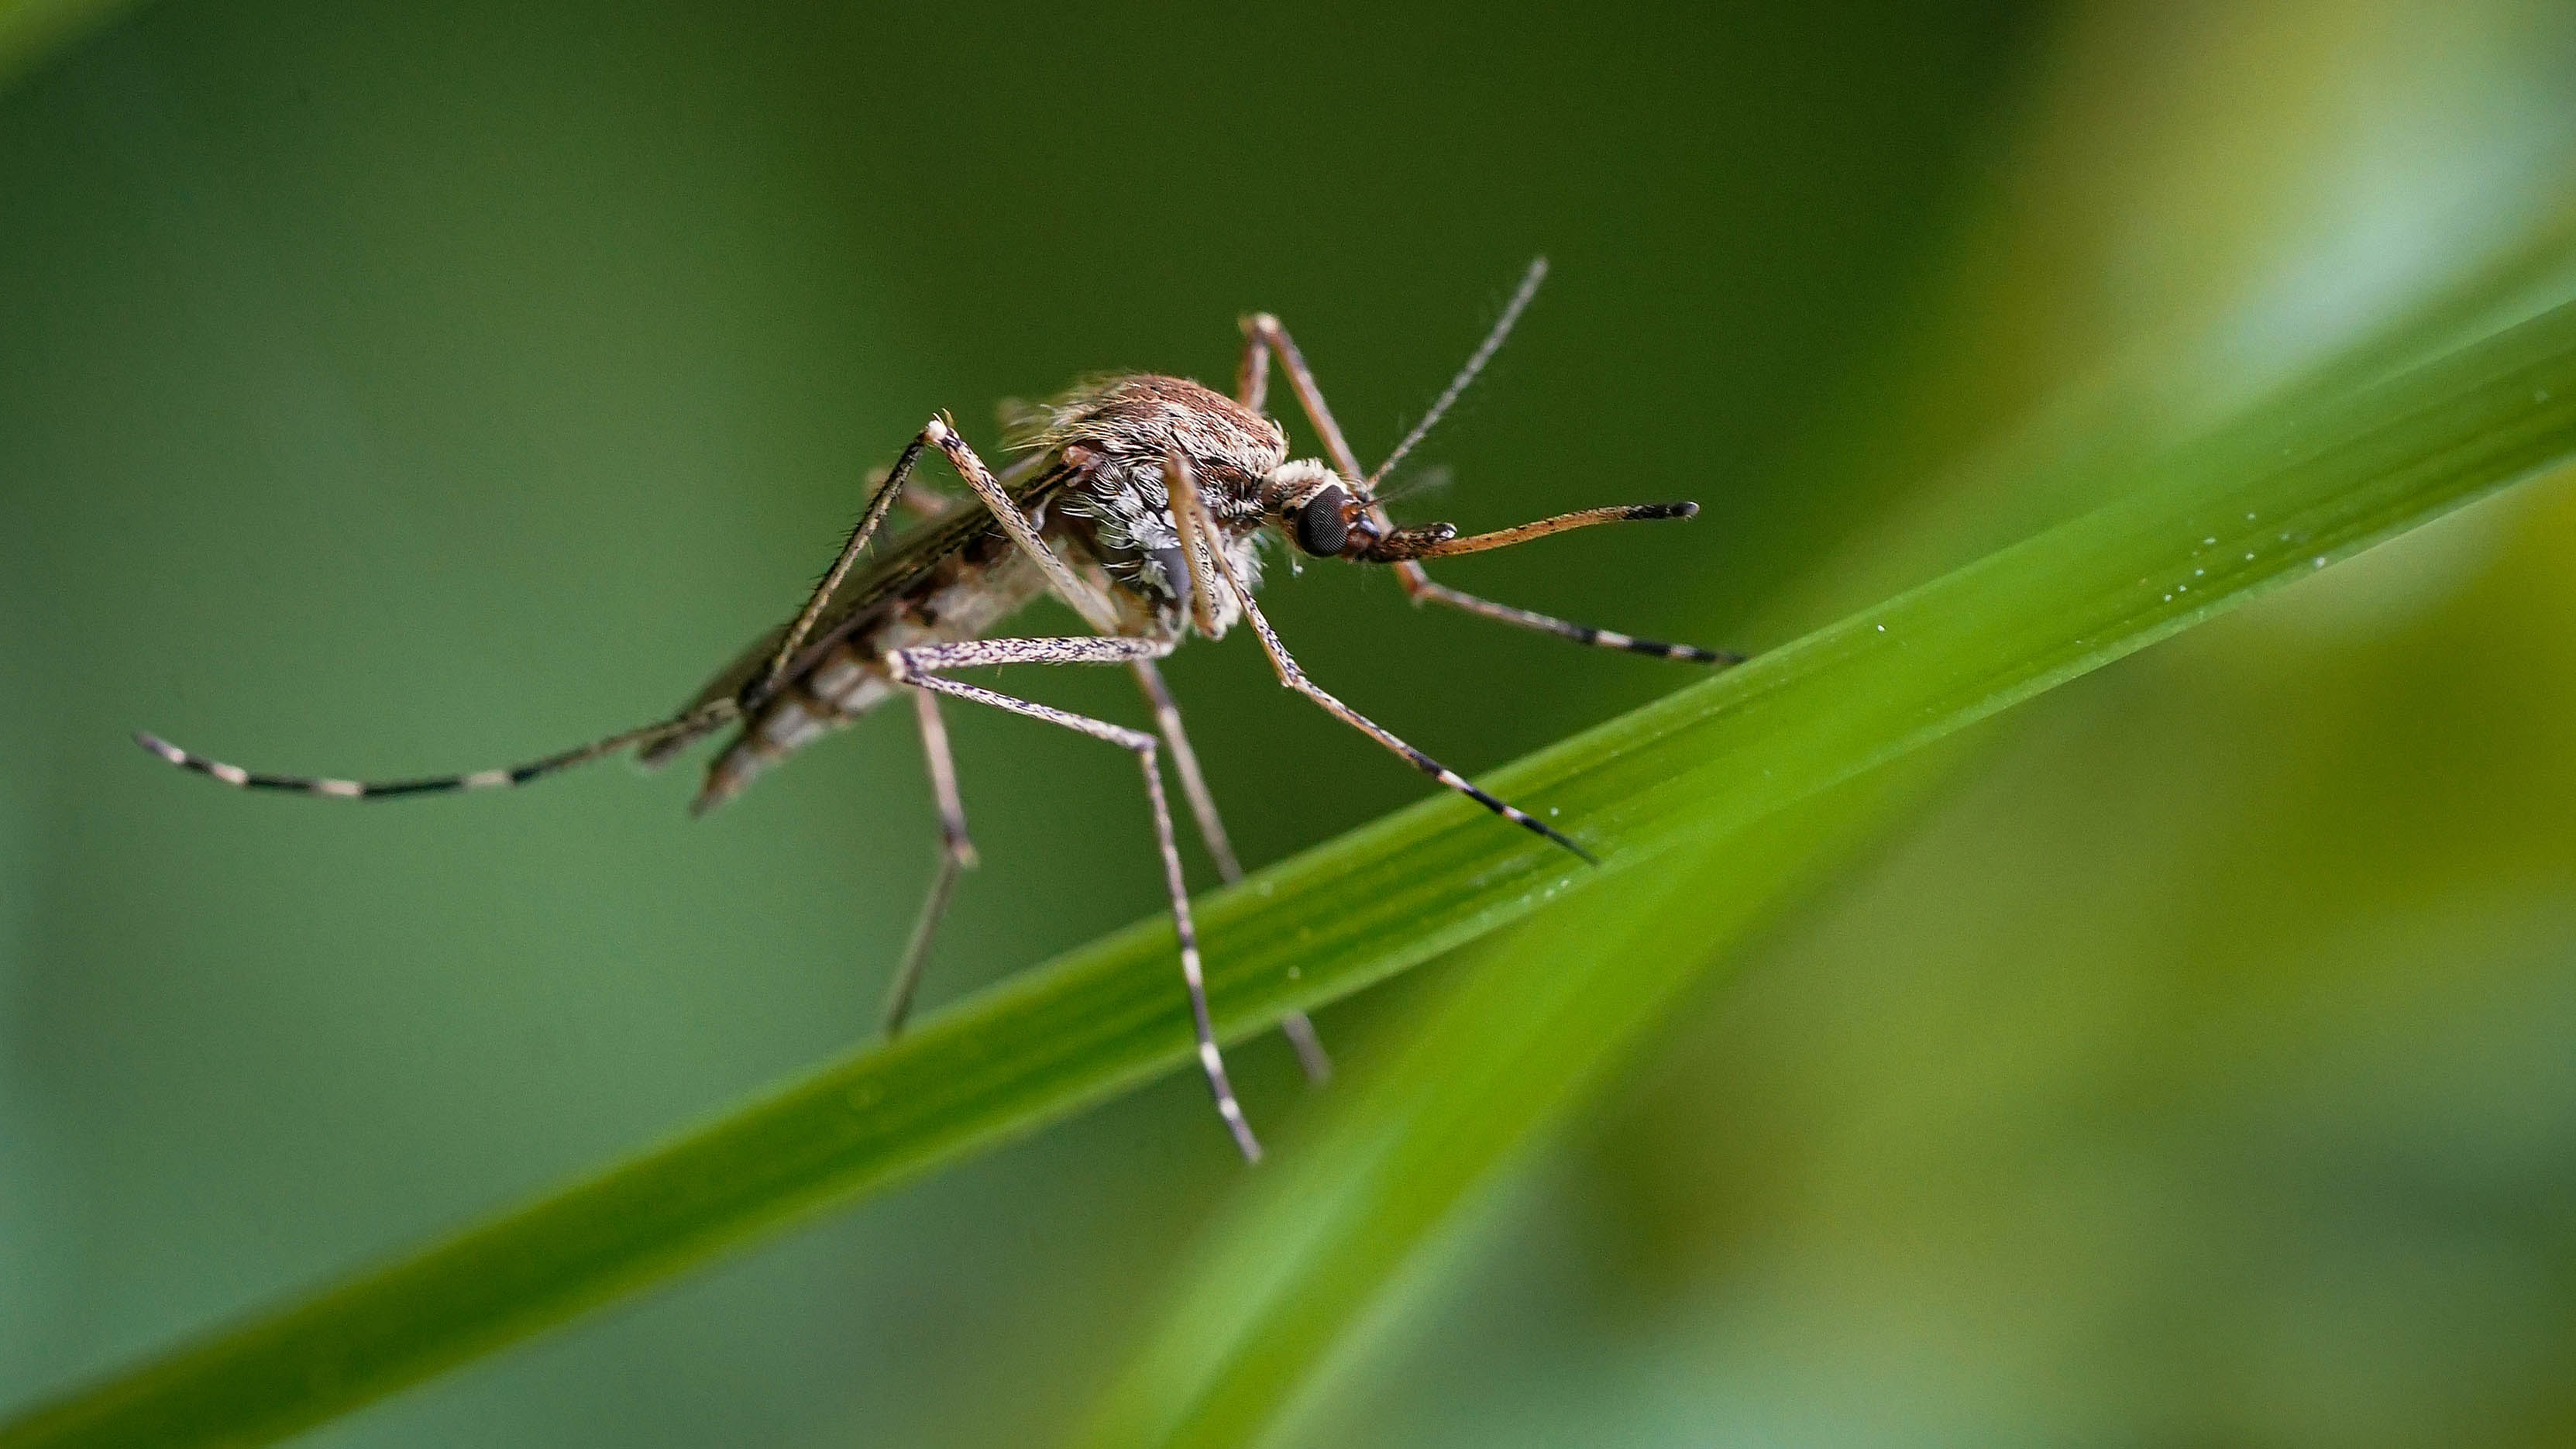 A mosquito resting on a plant